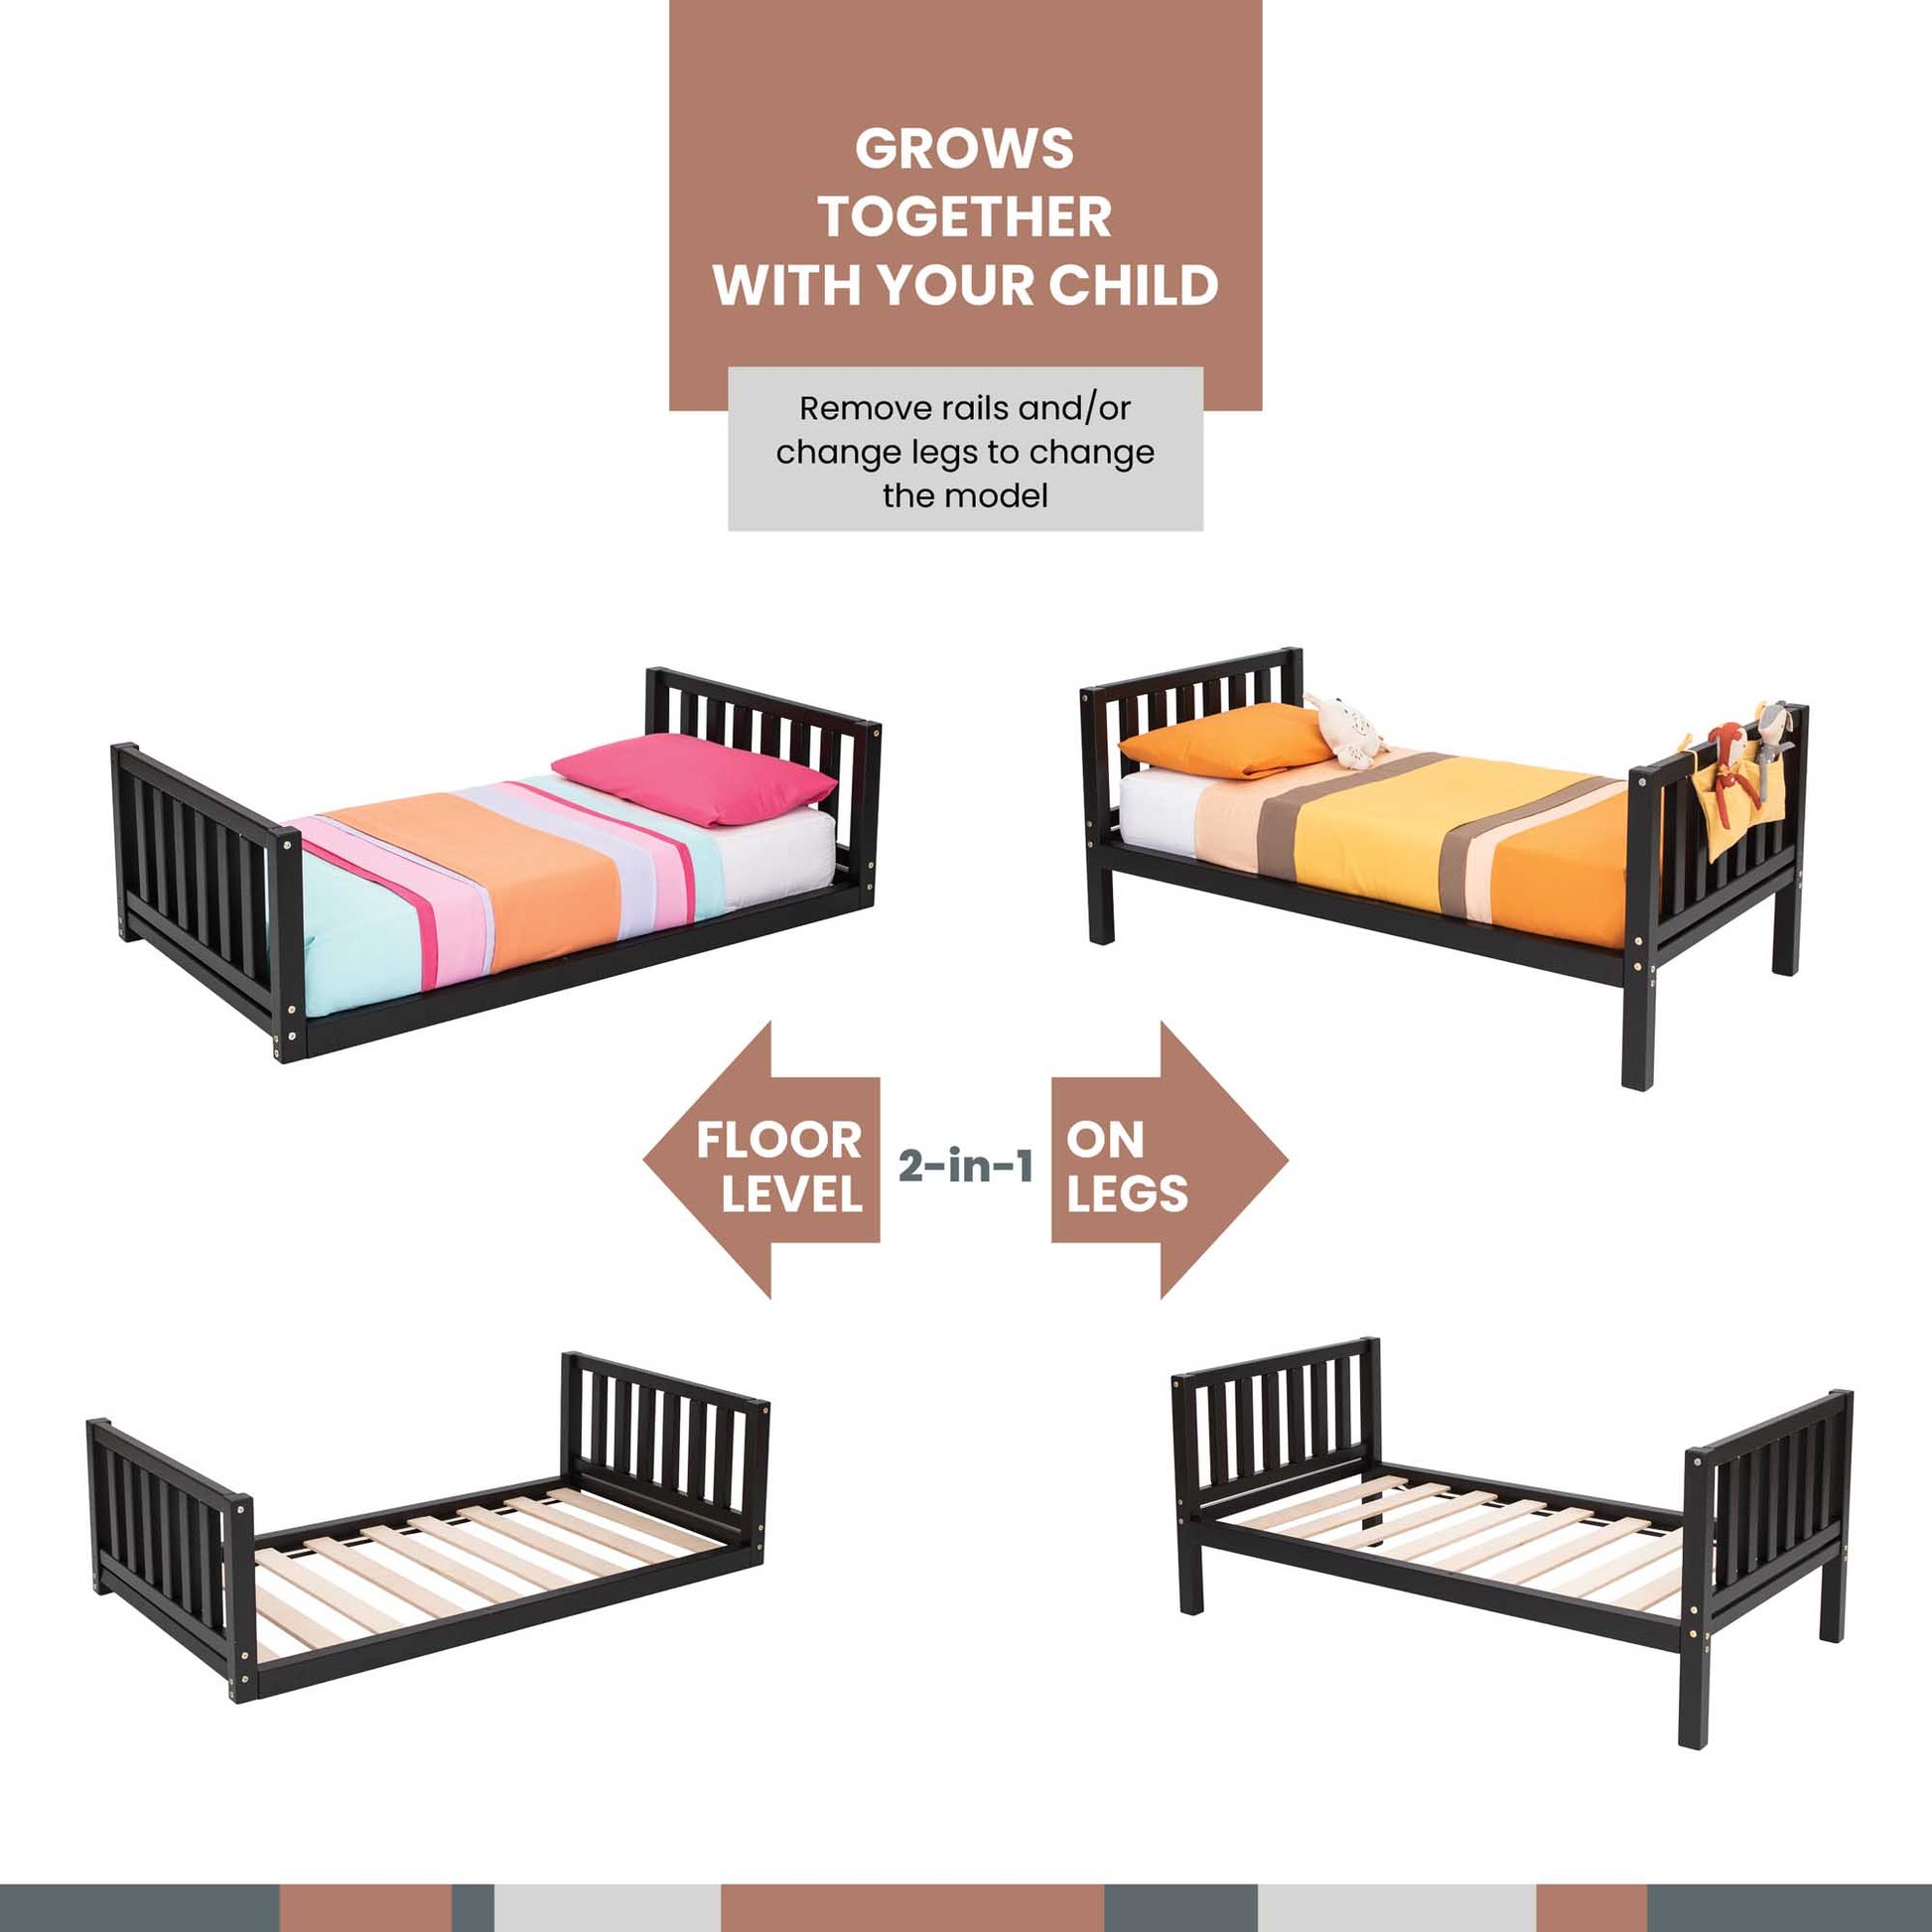 A poster showcasing the 2-in-1 kid's bed on legs with a vertical rail headboard and footboard, featuring options such as floor-level bed and crafted from either solid pine or birch wood.